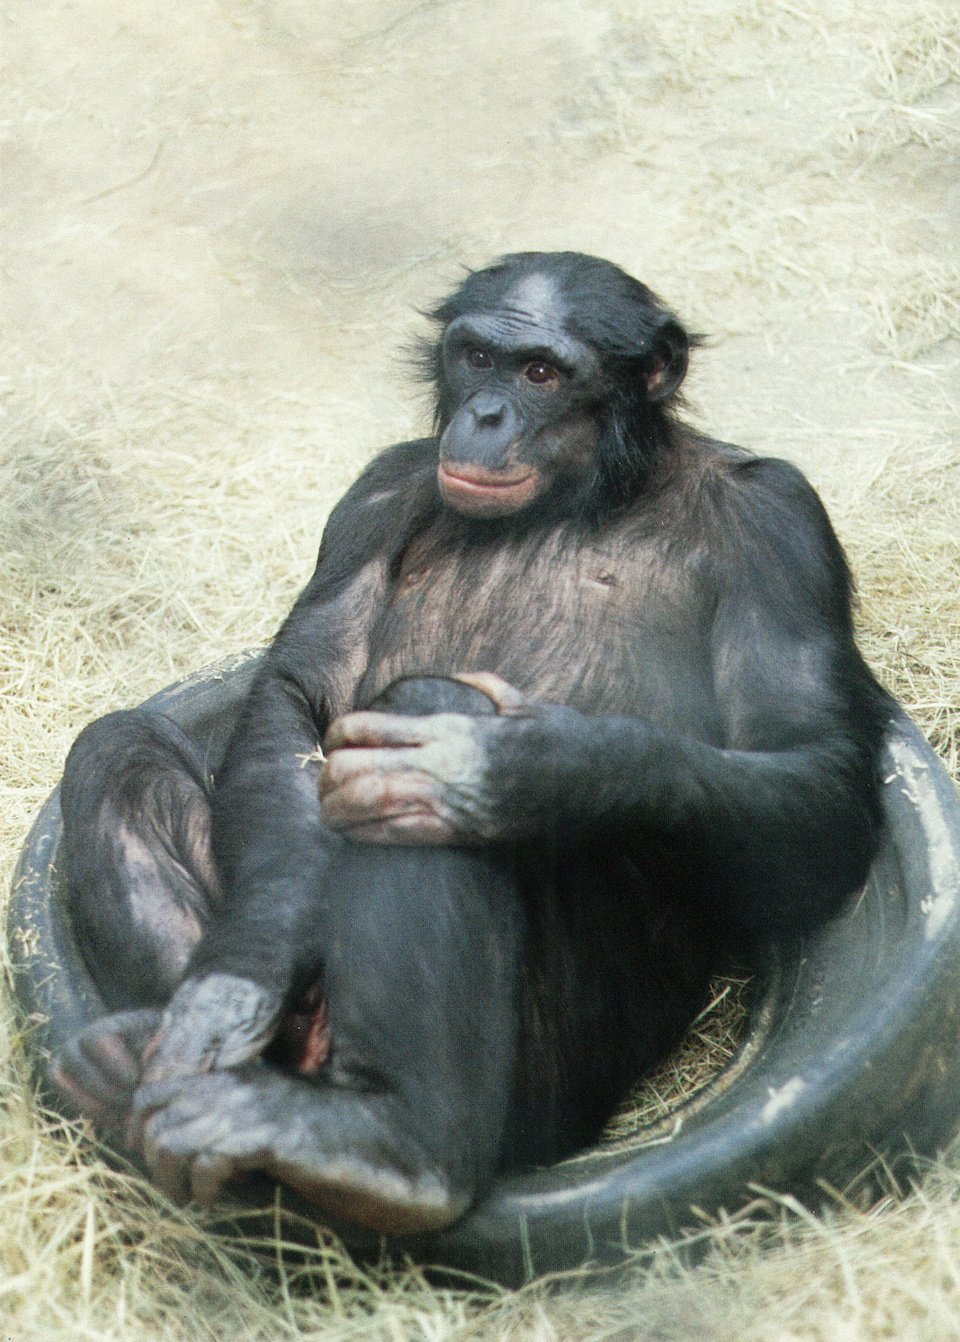 A thoughtful expression occupies the face of the adult male Bosondjo,as he surveys his fellow pygmy chimps from his perch in an old tyre at the Yerkes Regional Primate Research Center, Atlanta, GA.